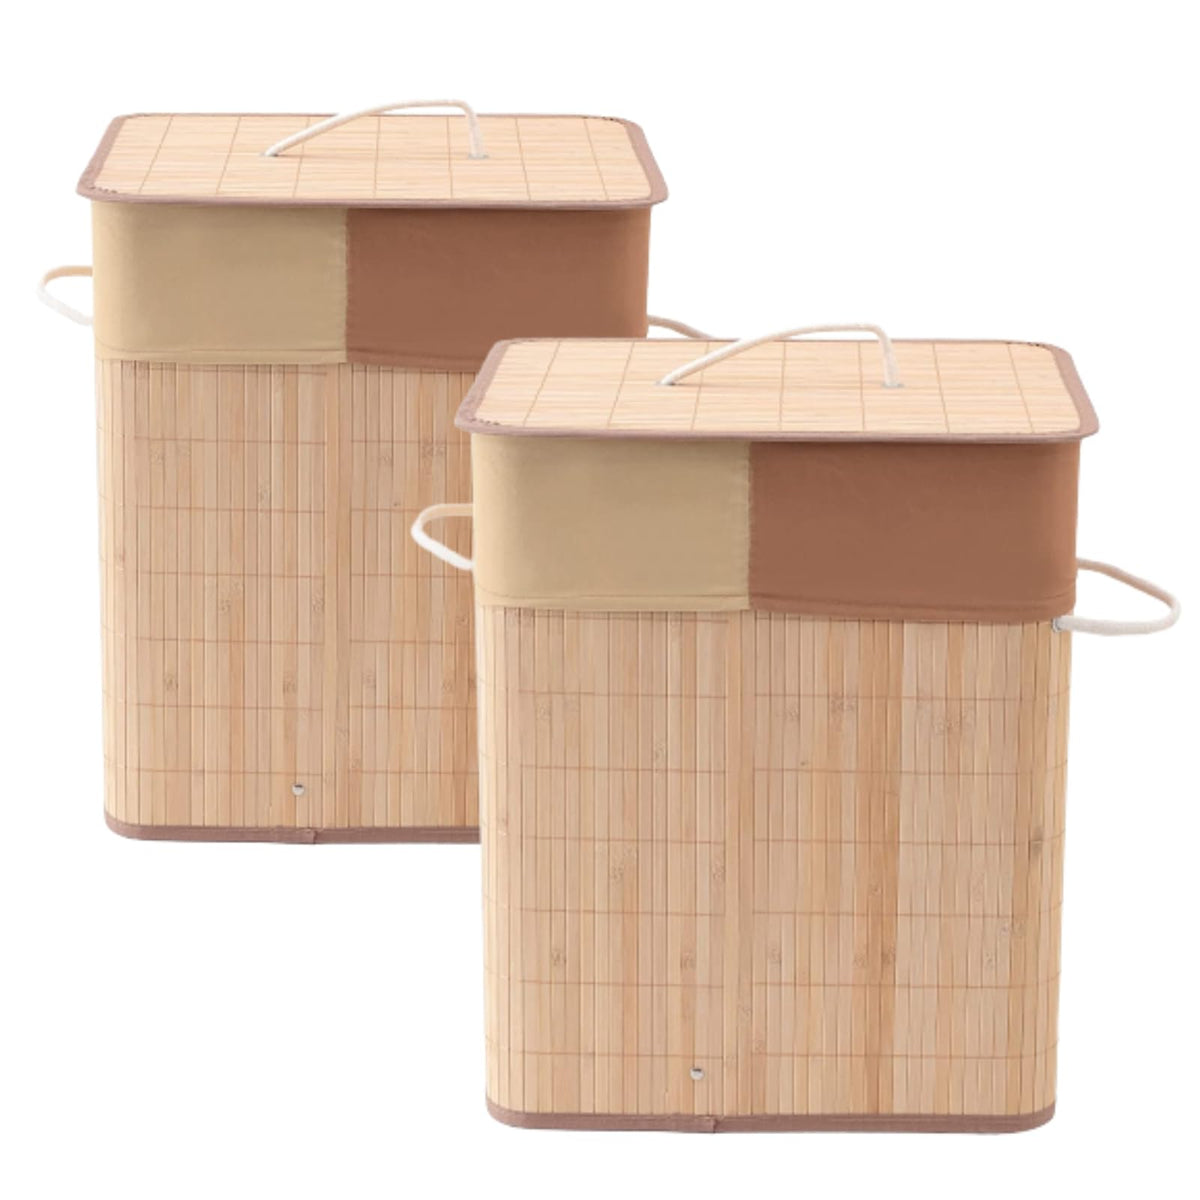 SAVYA HOME Bamboo Laundry basket with lid | Laundry bags for clothes | Foldable & Durable with liner bag | Perfect cloth basket, toys organiser storage | Light Brown (2)